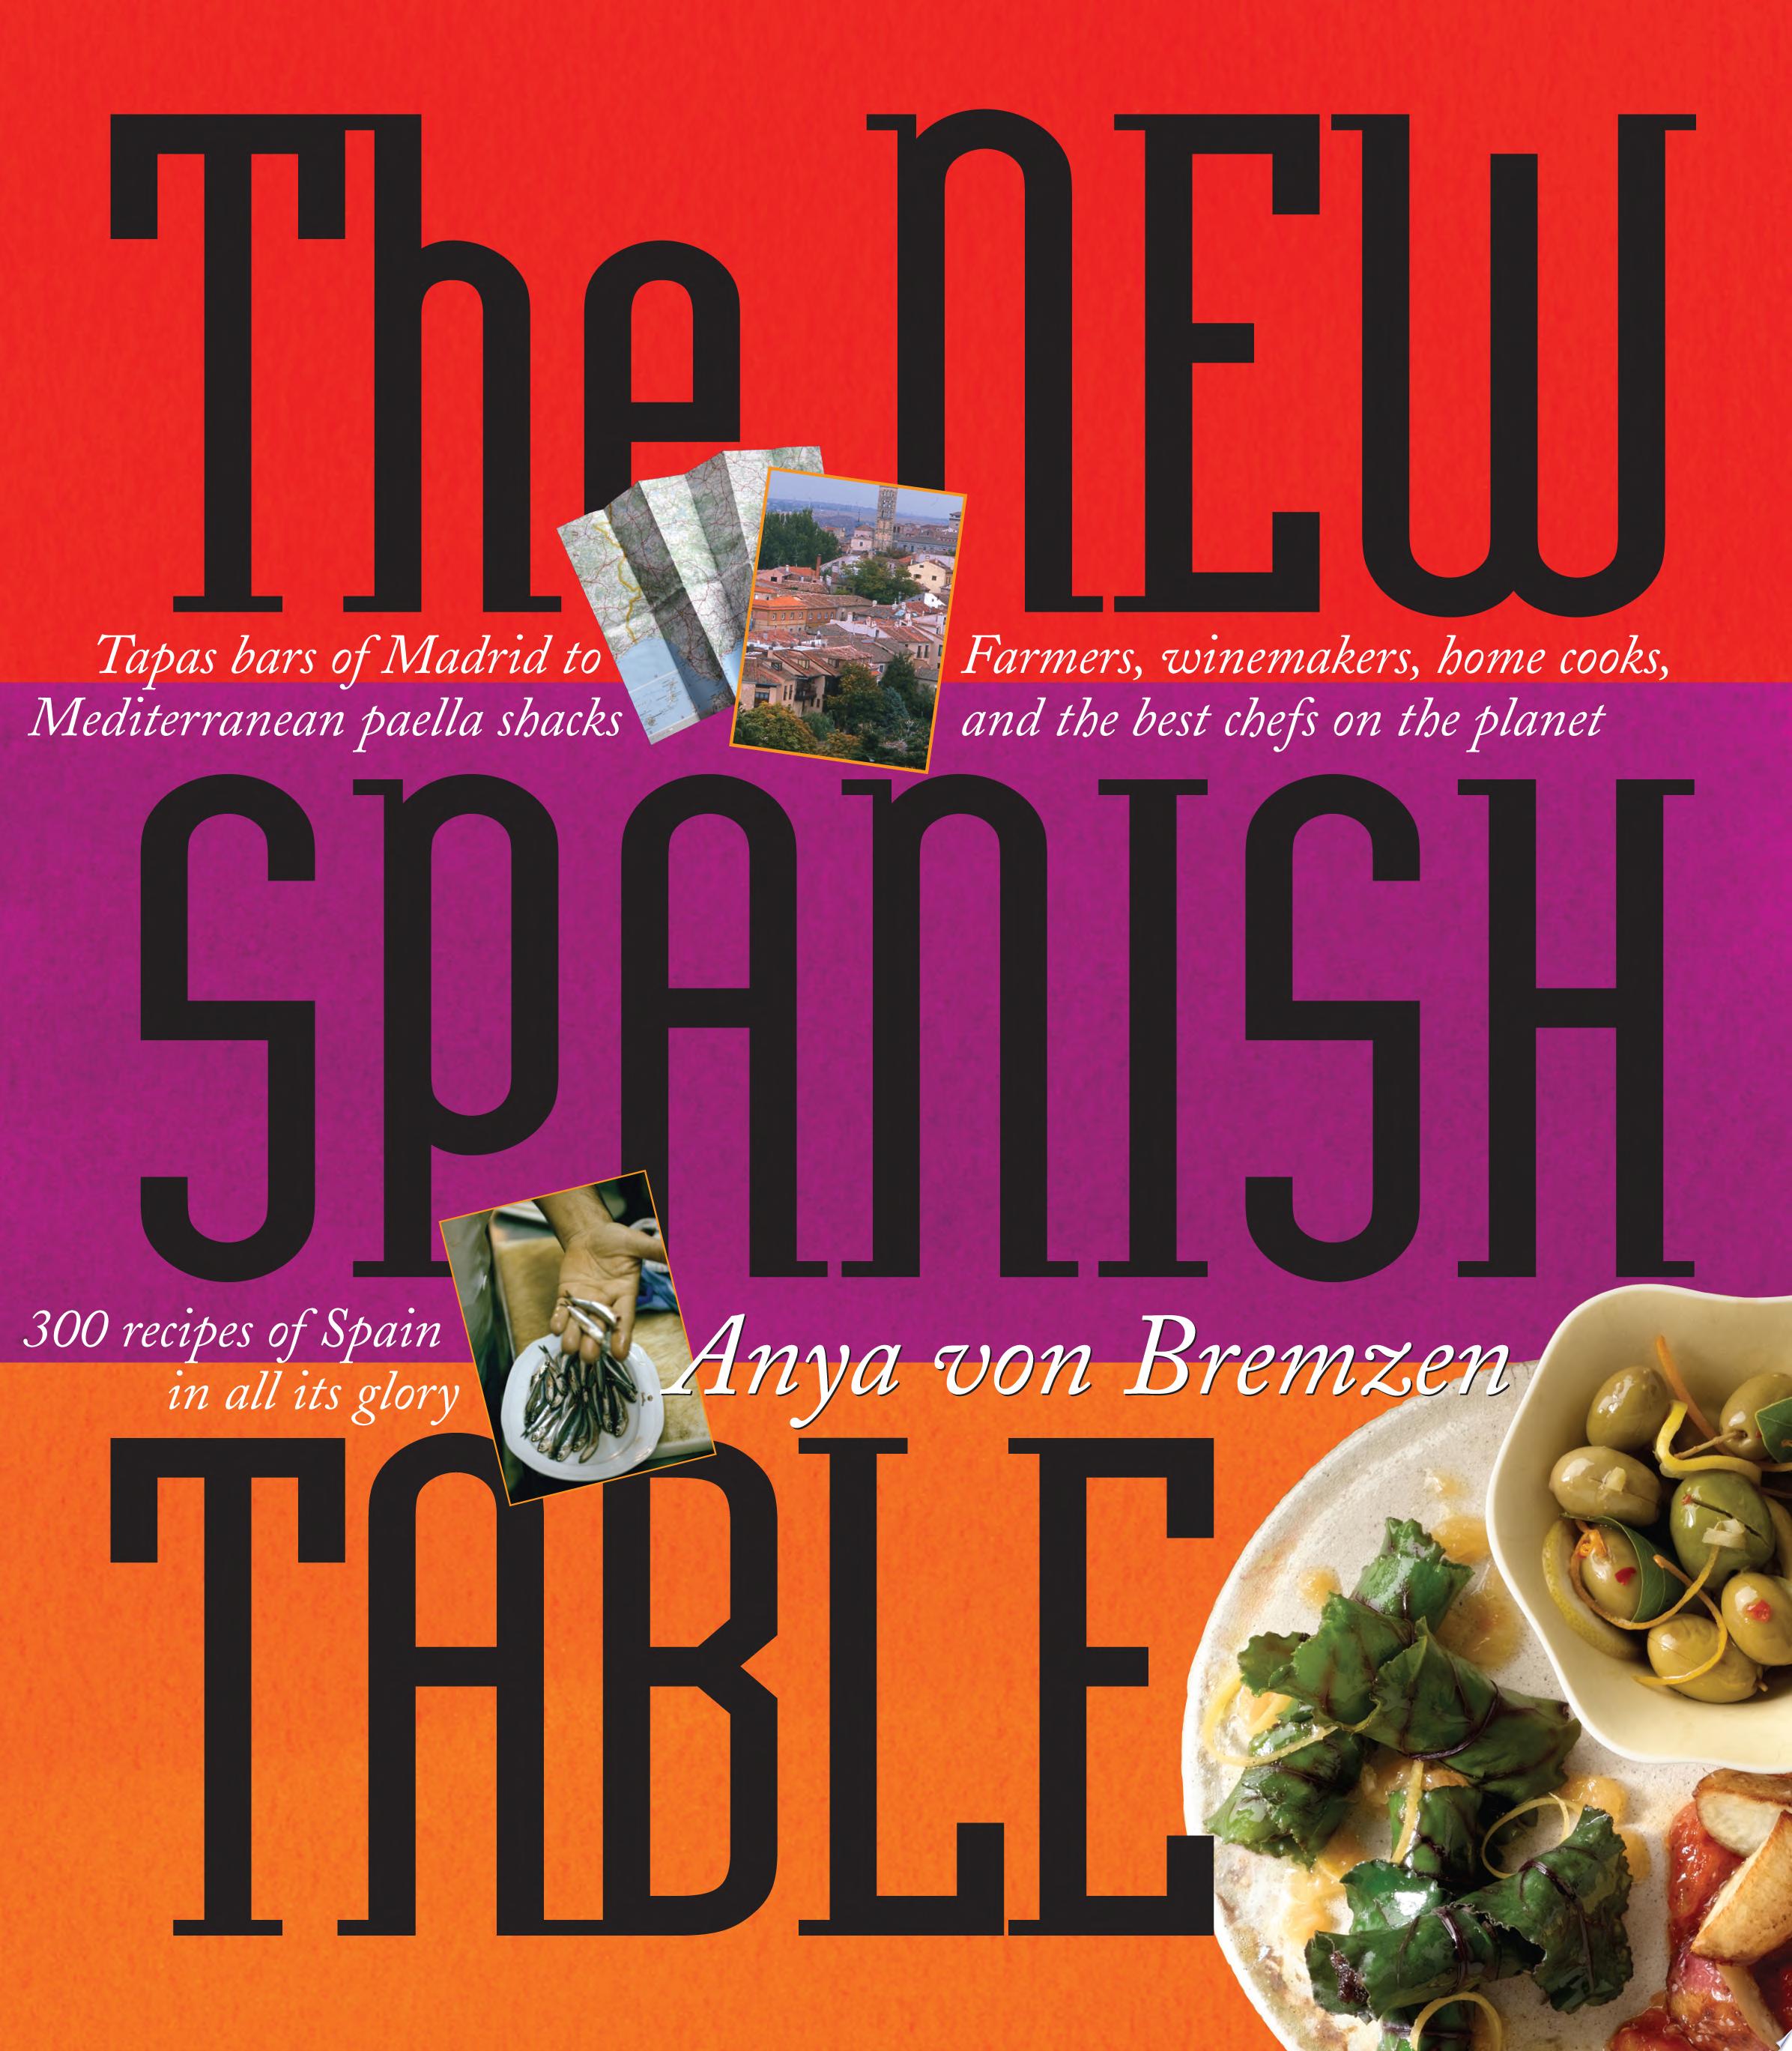 Image for "The New Spanish Table"